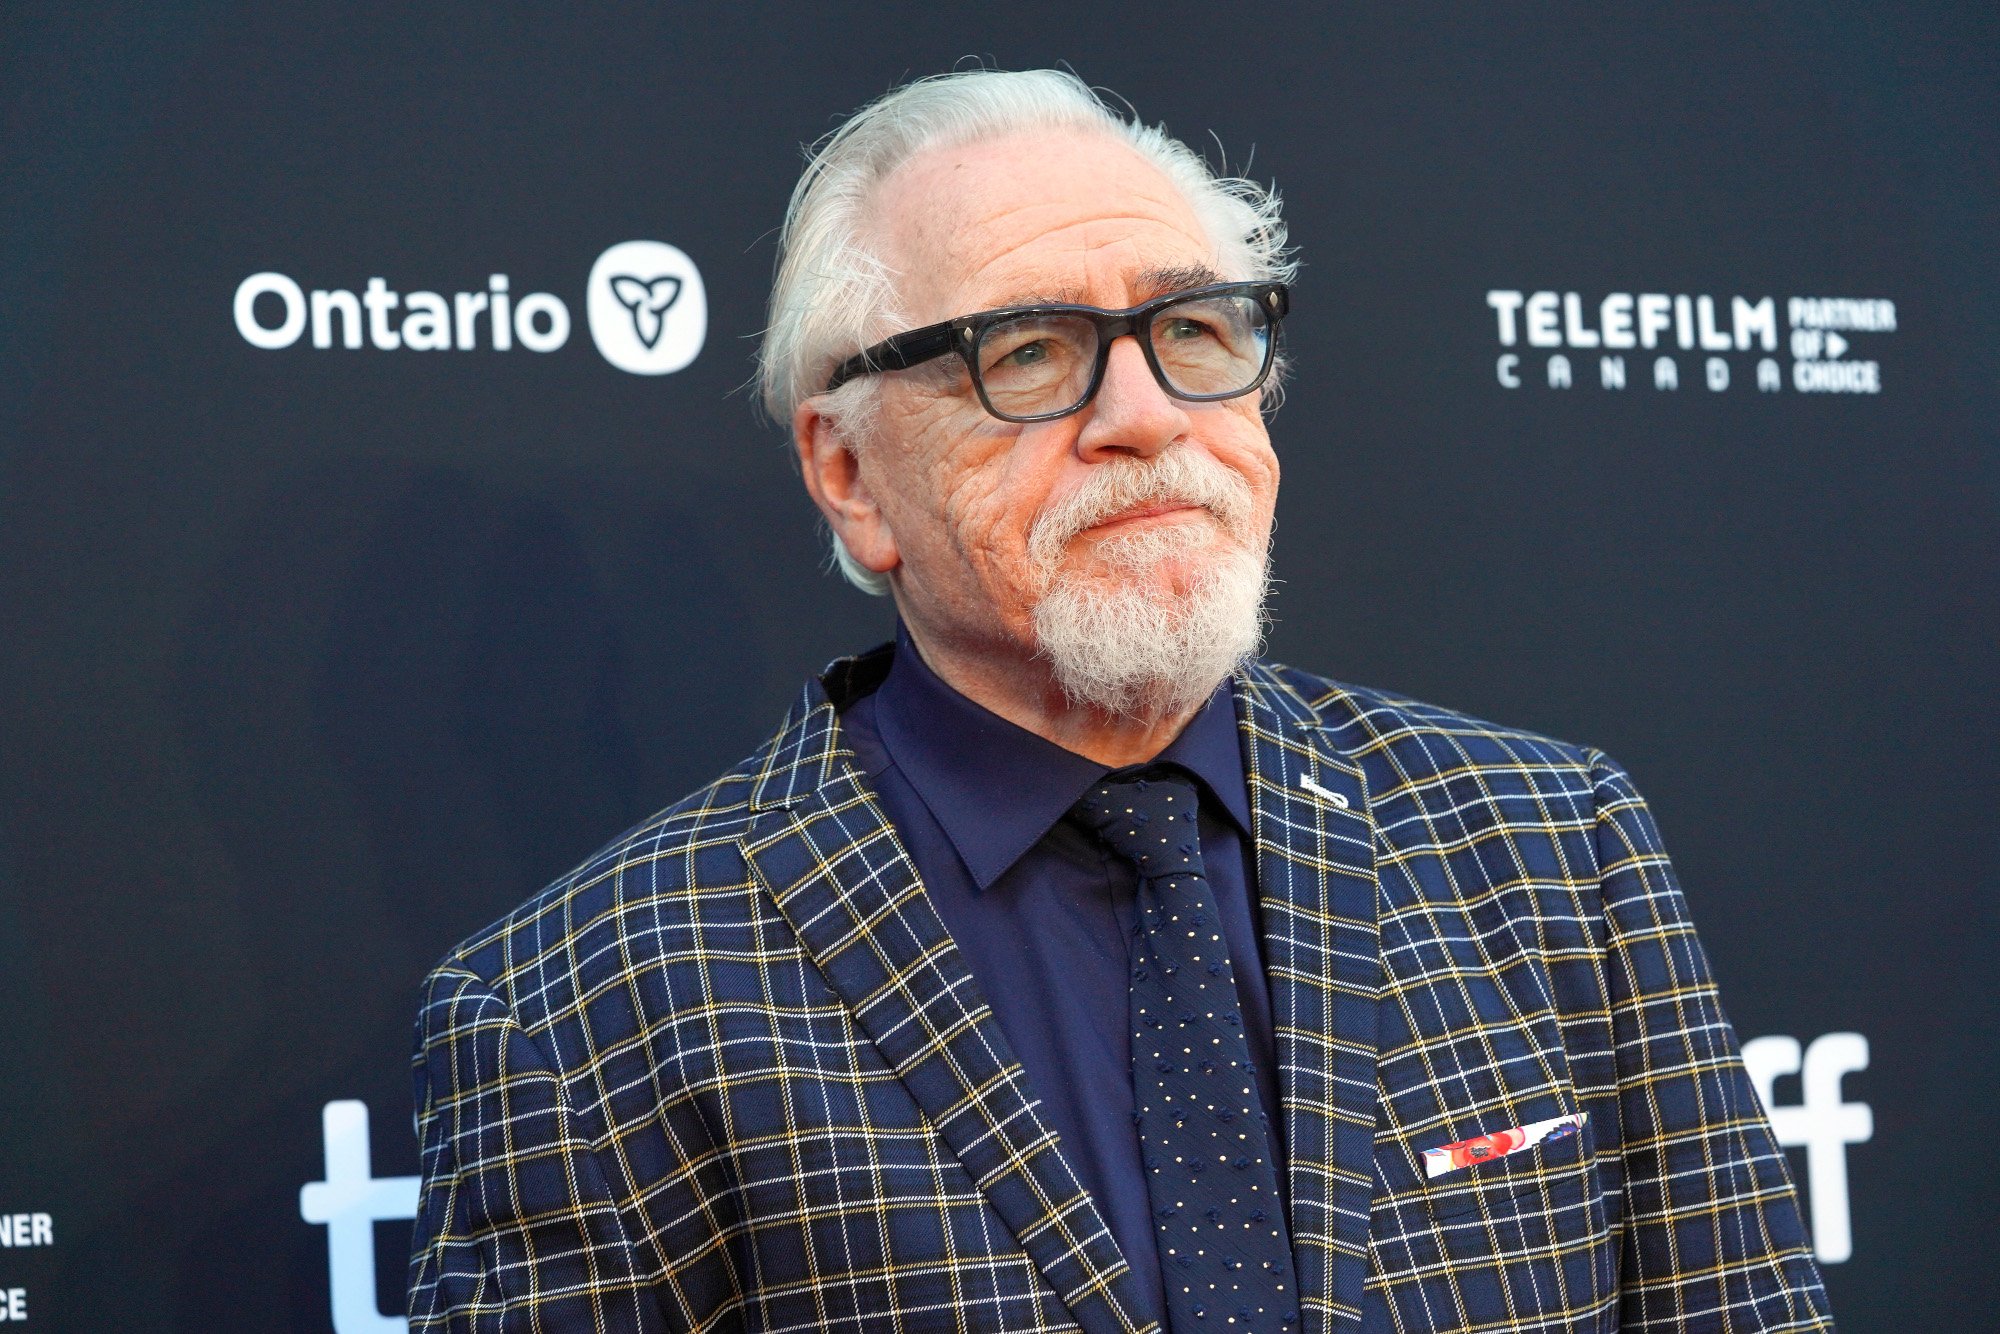 'Succession' cast member Brian Cox on the red carpet at the Toronto International Film Festival. He's wearing a dark blue shirt, blue and yellow checkered jacket, and glasses.